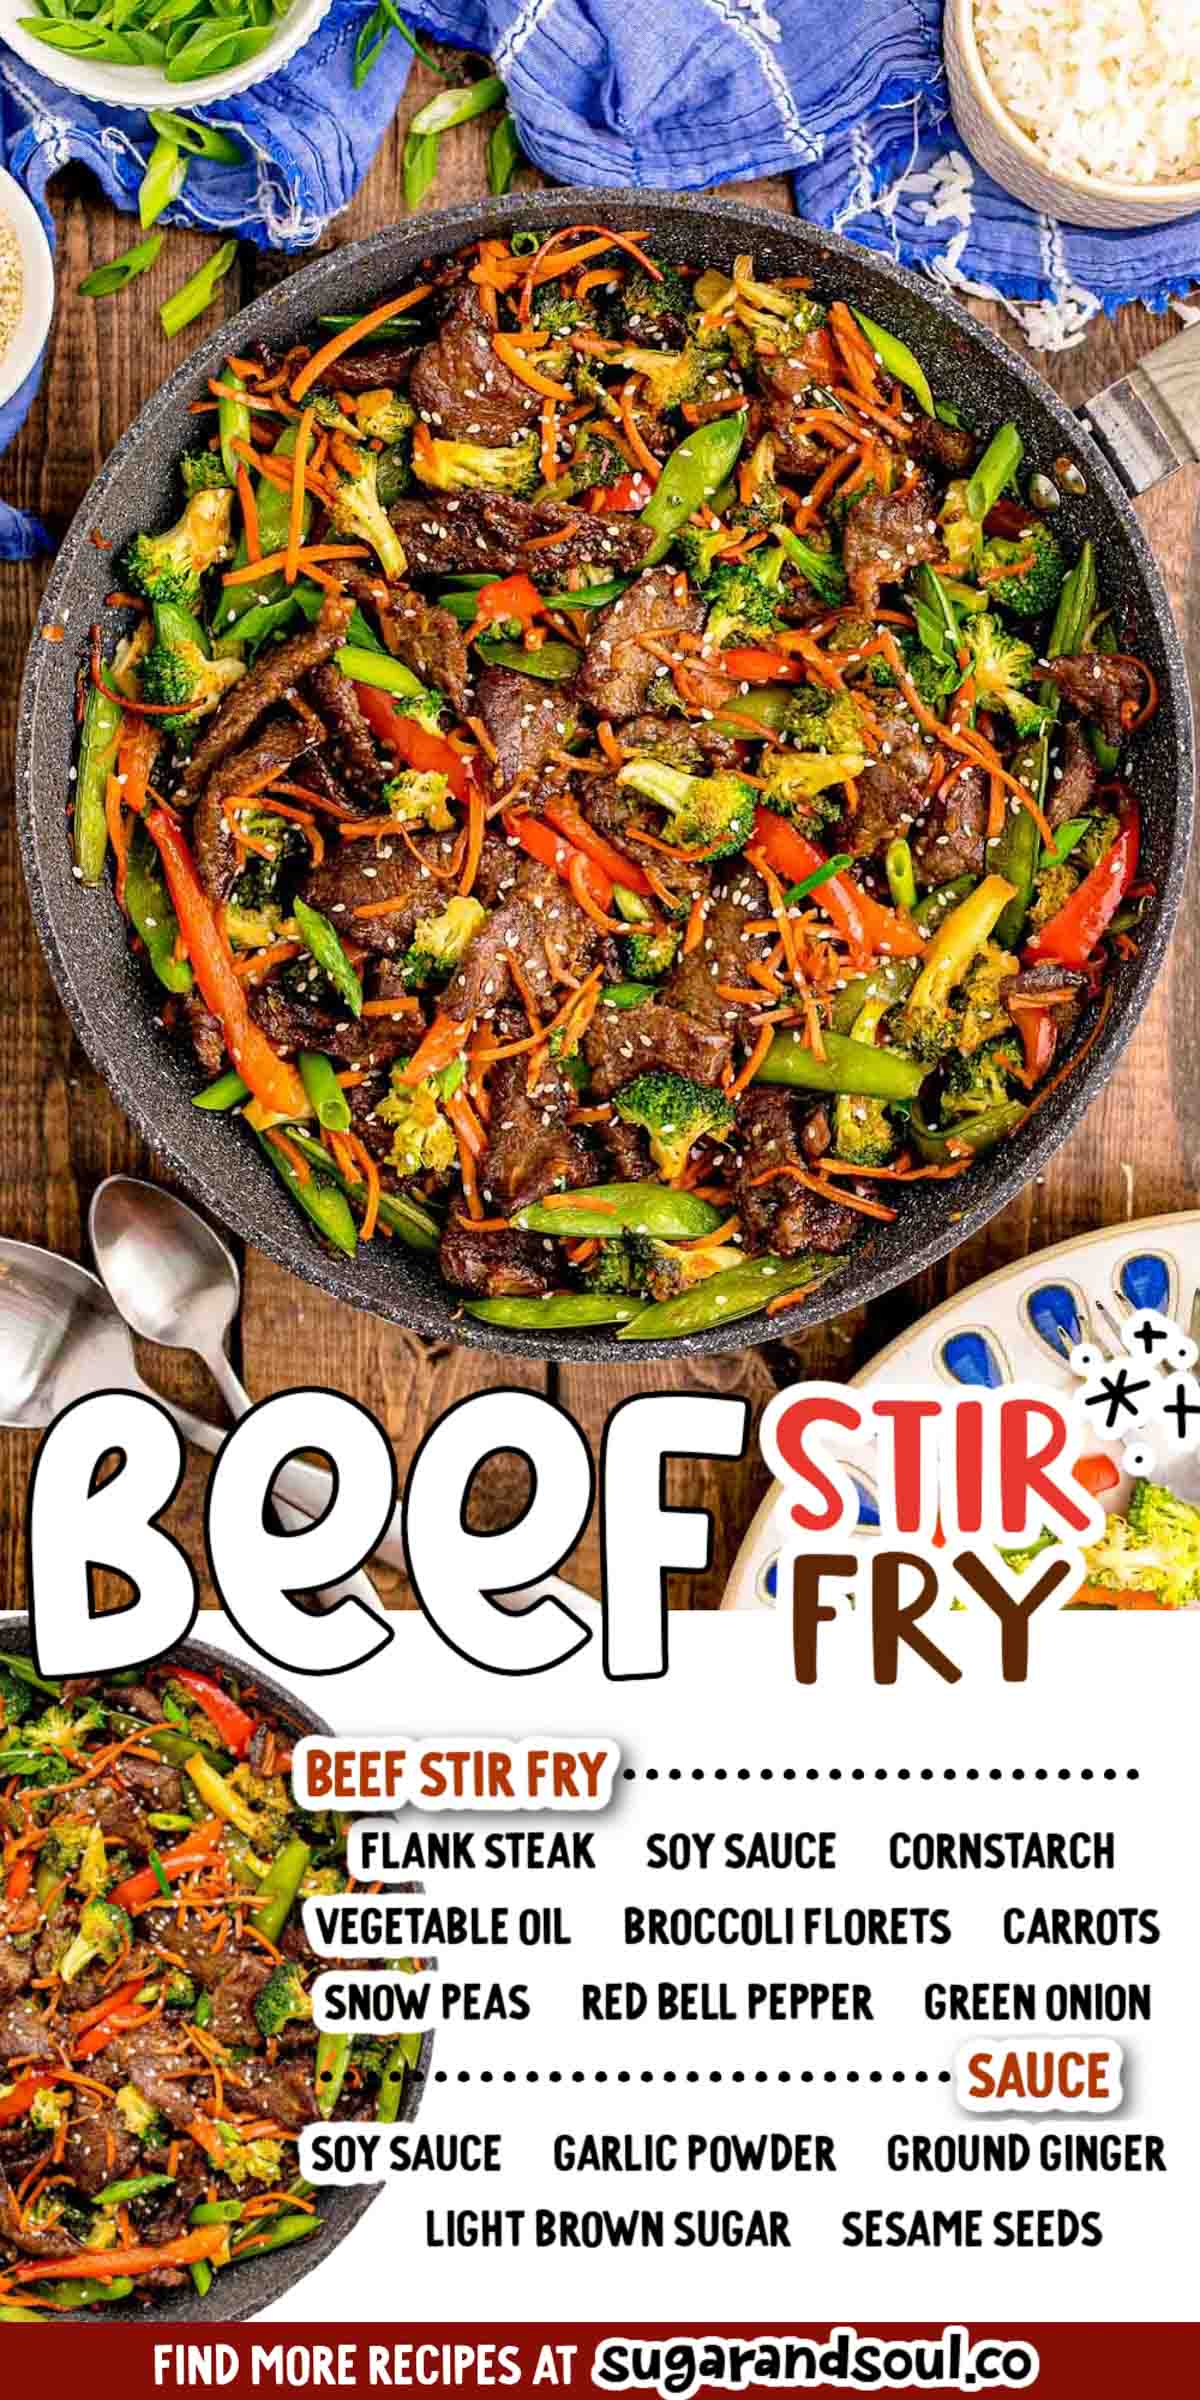 This Beef Stir Fry gets dinner on the table in an hour that's packed with protein, vegetables, and tons of delicious flavor that you'll love! Make it with your favorite vegetables! via @sugarandsoulco